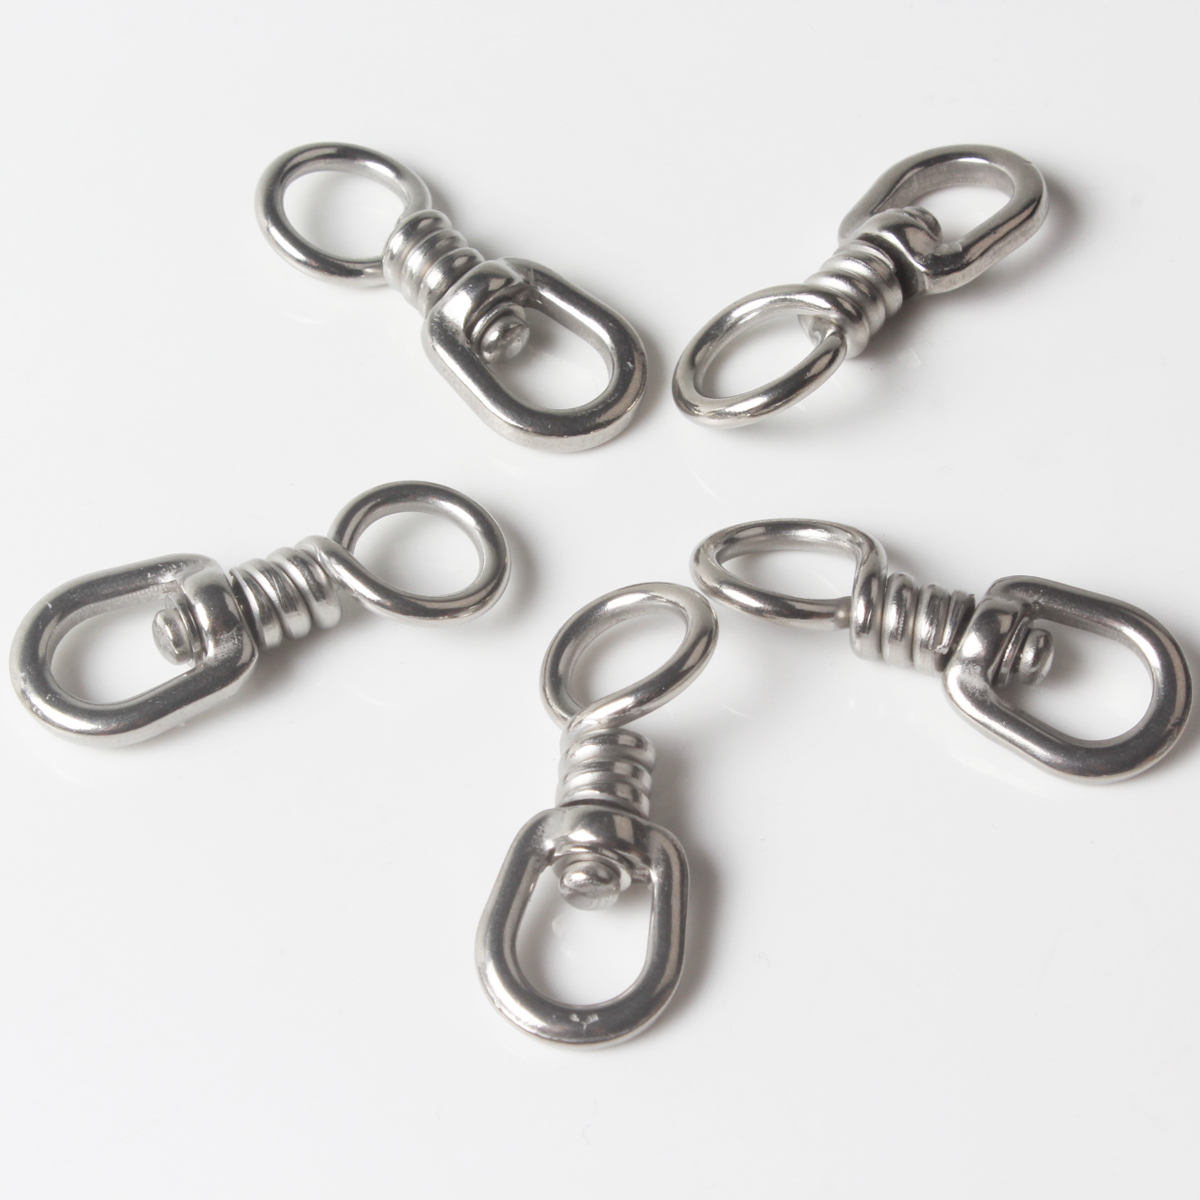 Stainless Steel Swivel For Sea Tuna Terminal Jigging Longline Saltwater Fishing Tackle Rigs